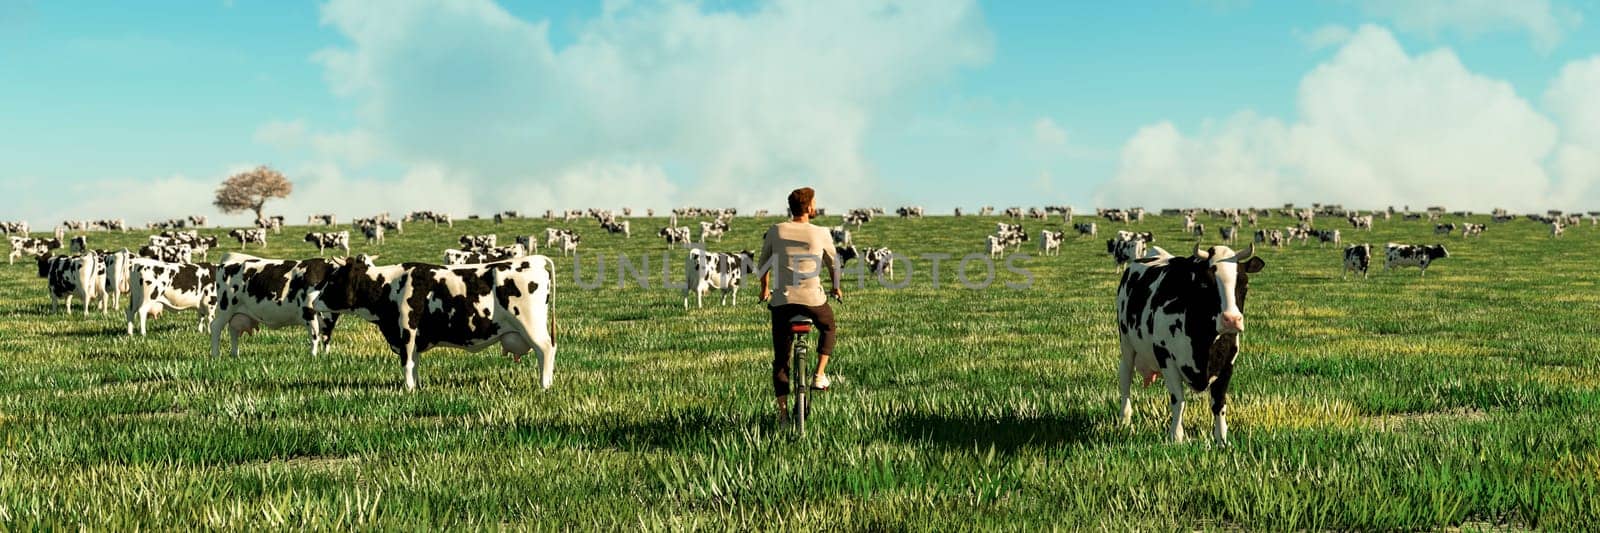 A peaceful scene capturing a man on a bicycle meandering among a herd of cows on a vibrant green farm.